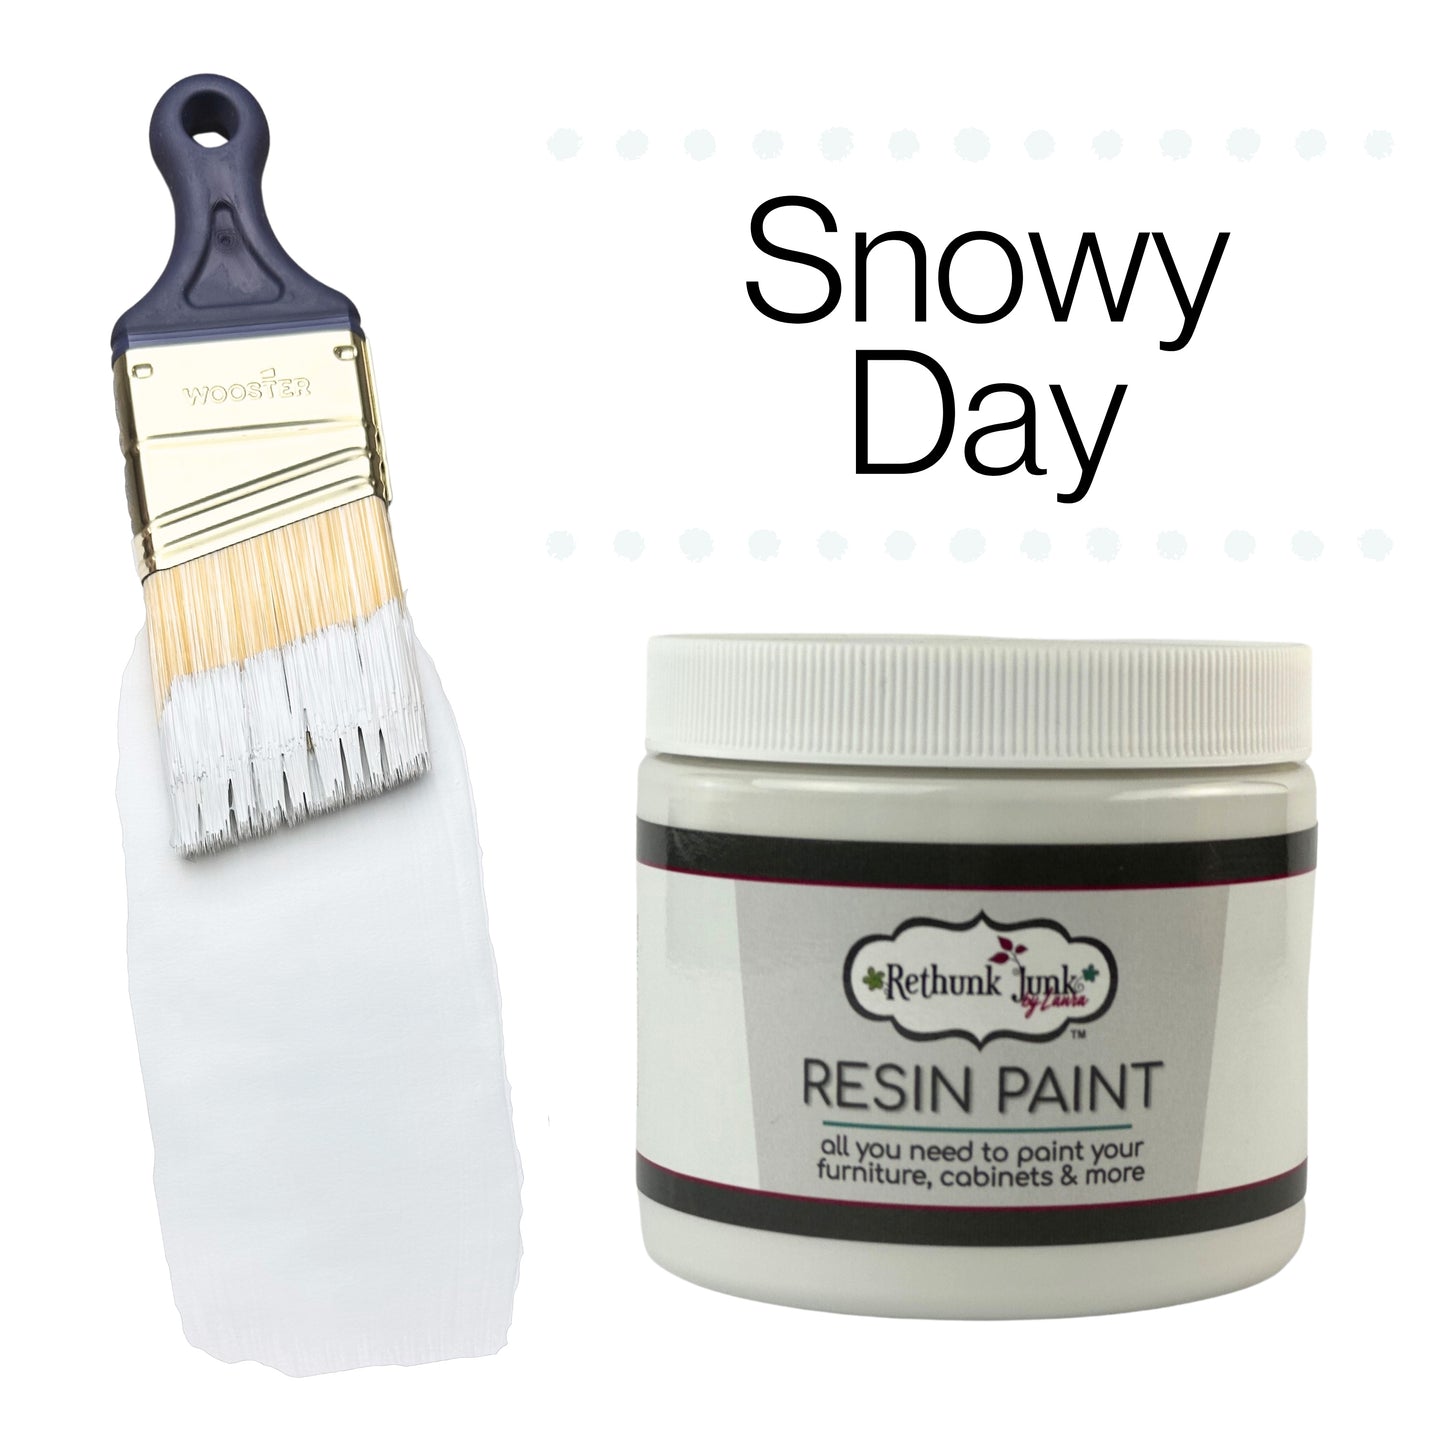 Rethunk Junk Resin Paint in Snowy Day